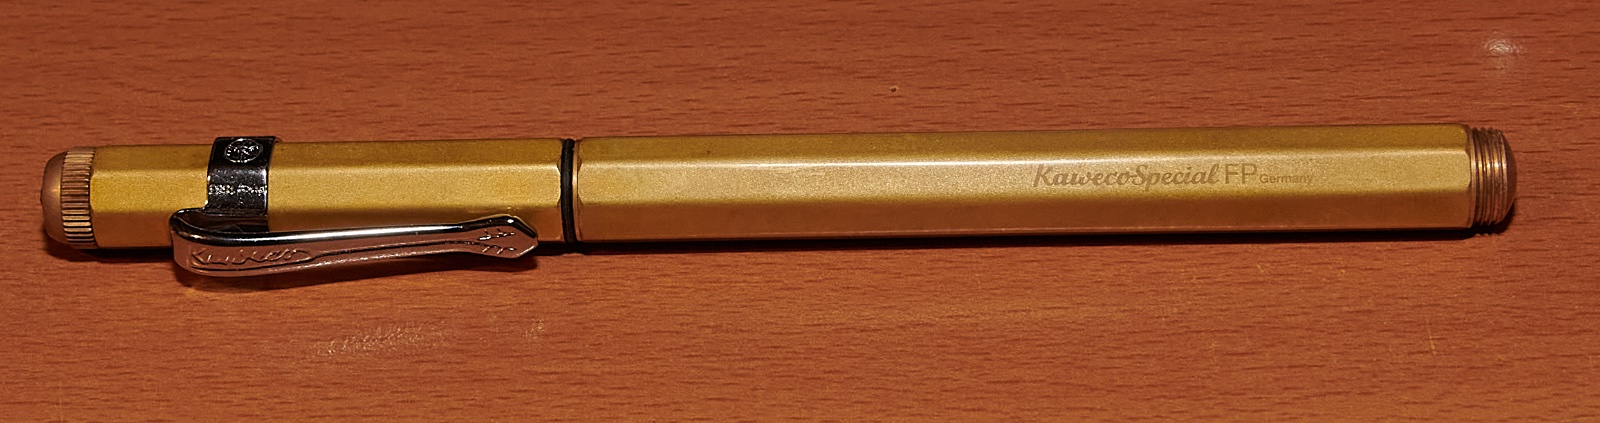 Kaweco Brass FP, speed up brass patina - Pen Turning and Making